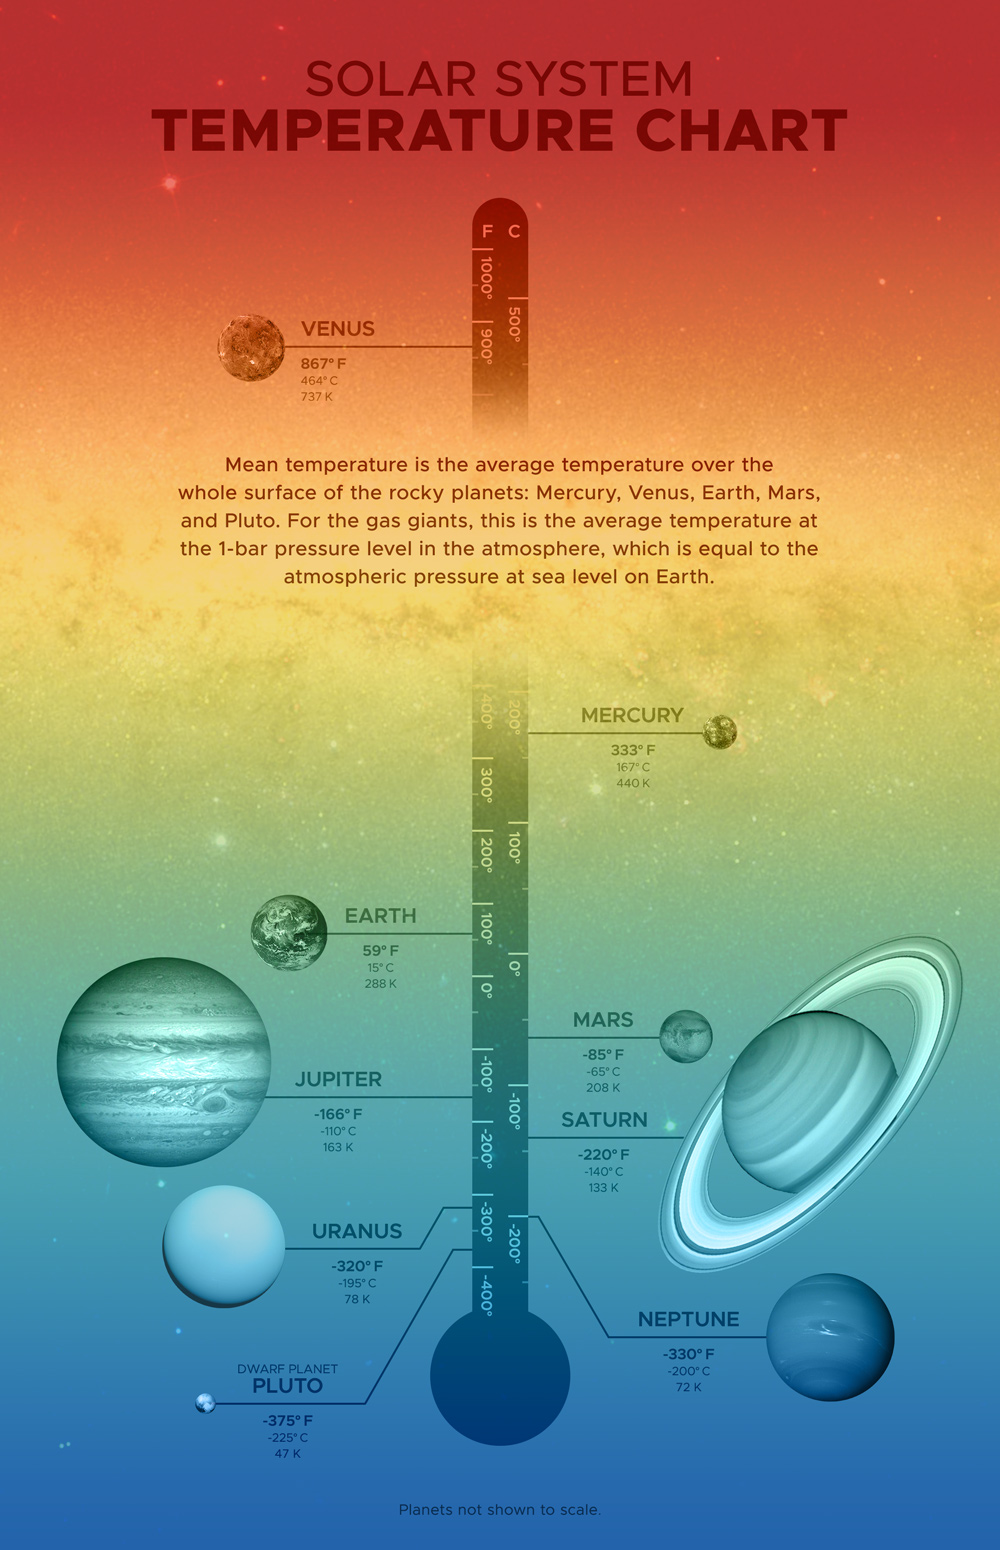 Thermometer showing mean temperatures of planets